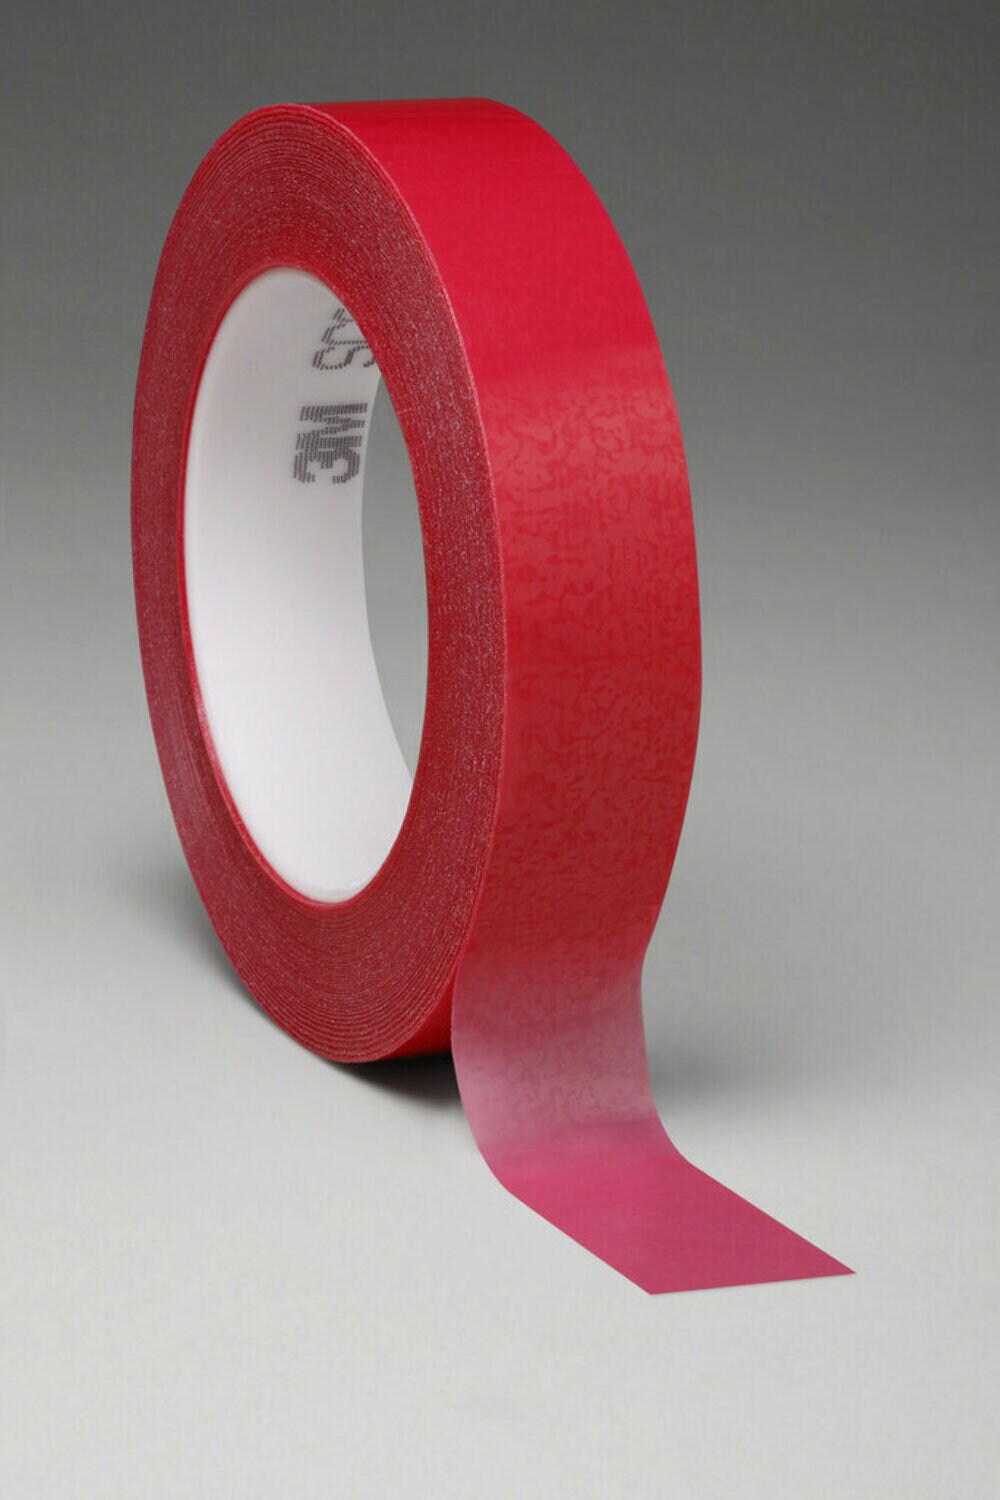 7010048804 - 3M Circuit Plating Tape 1280 Red, 15-5/8 in x 168 yds x 4.2 mil, 1/Case